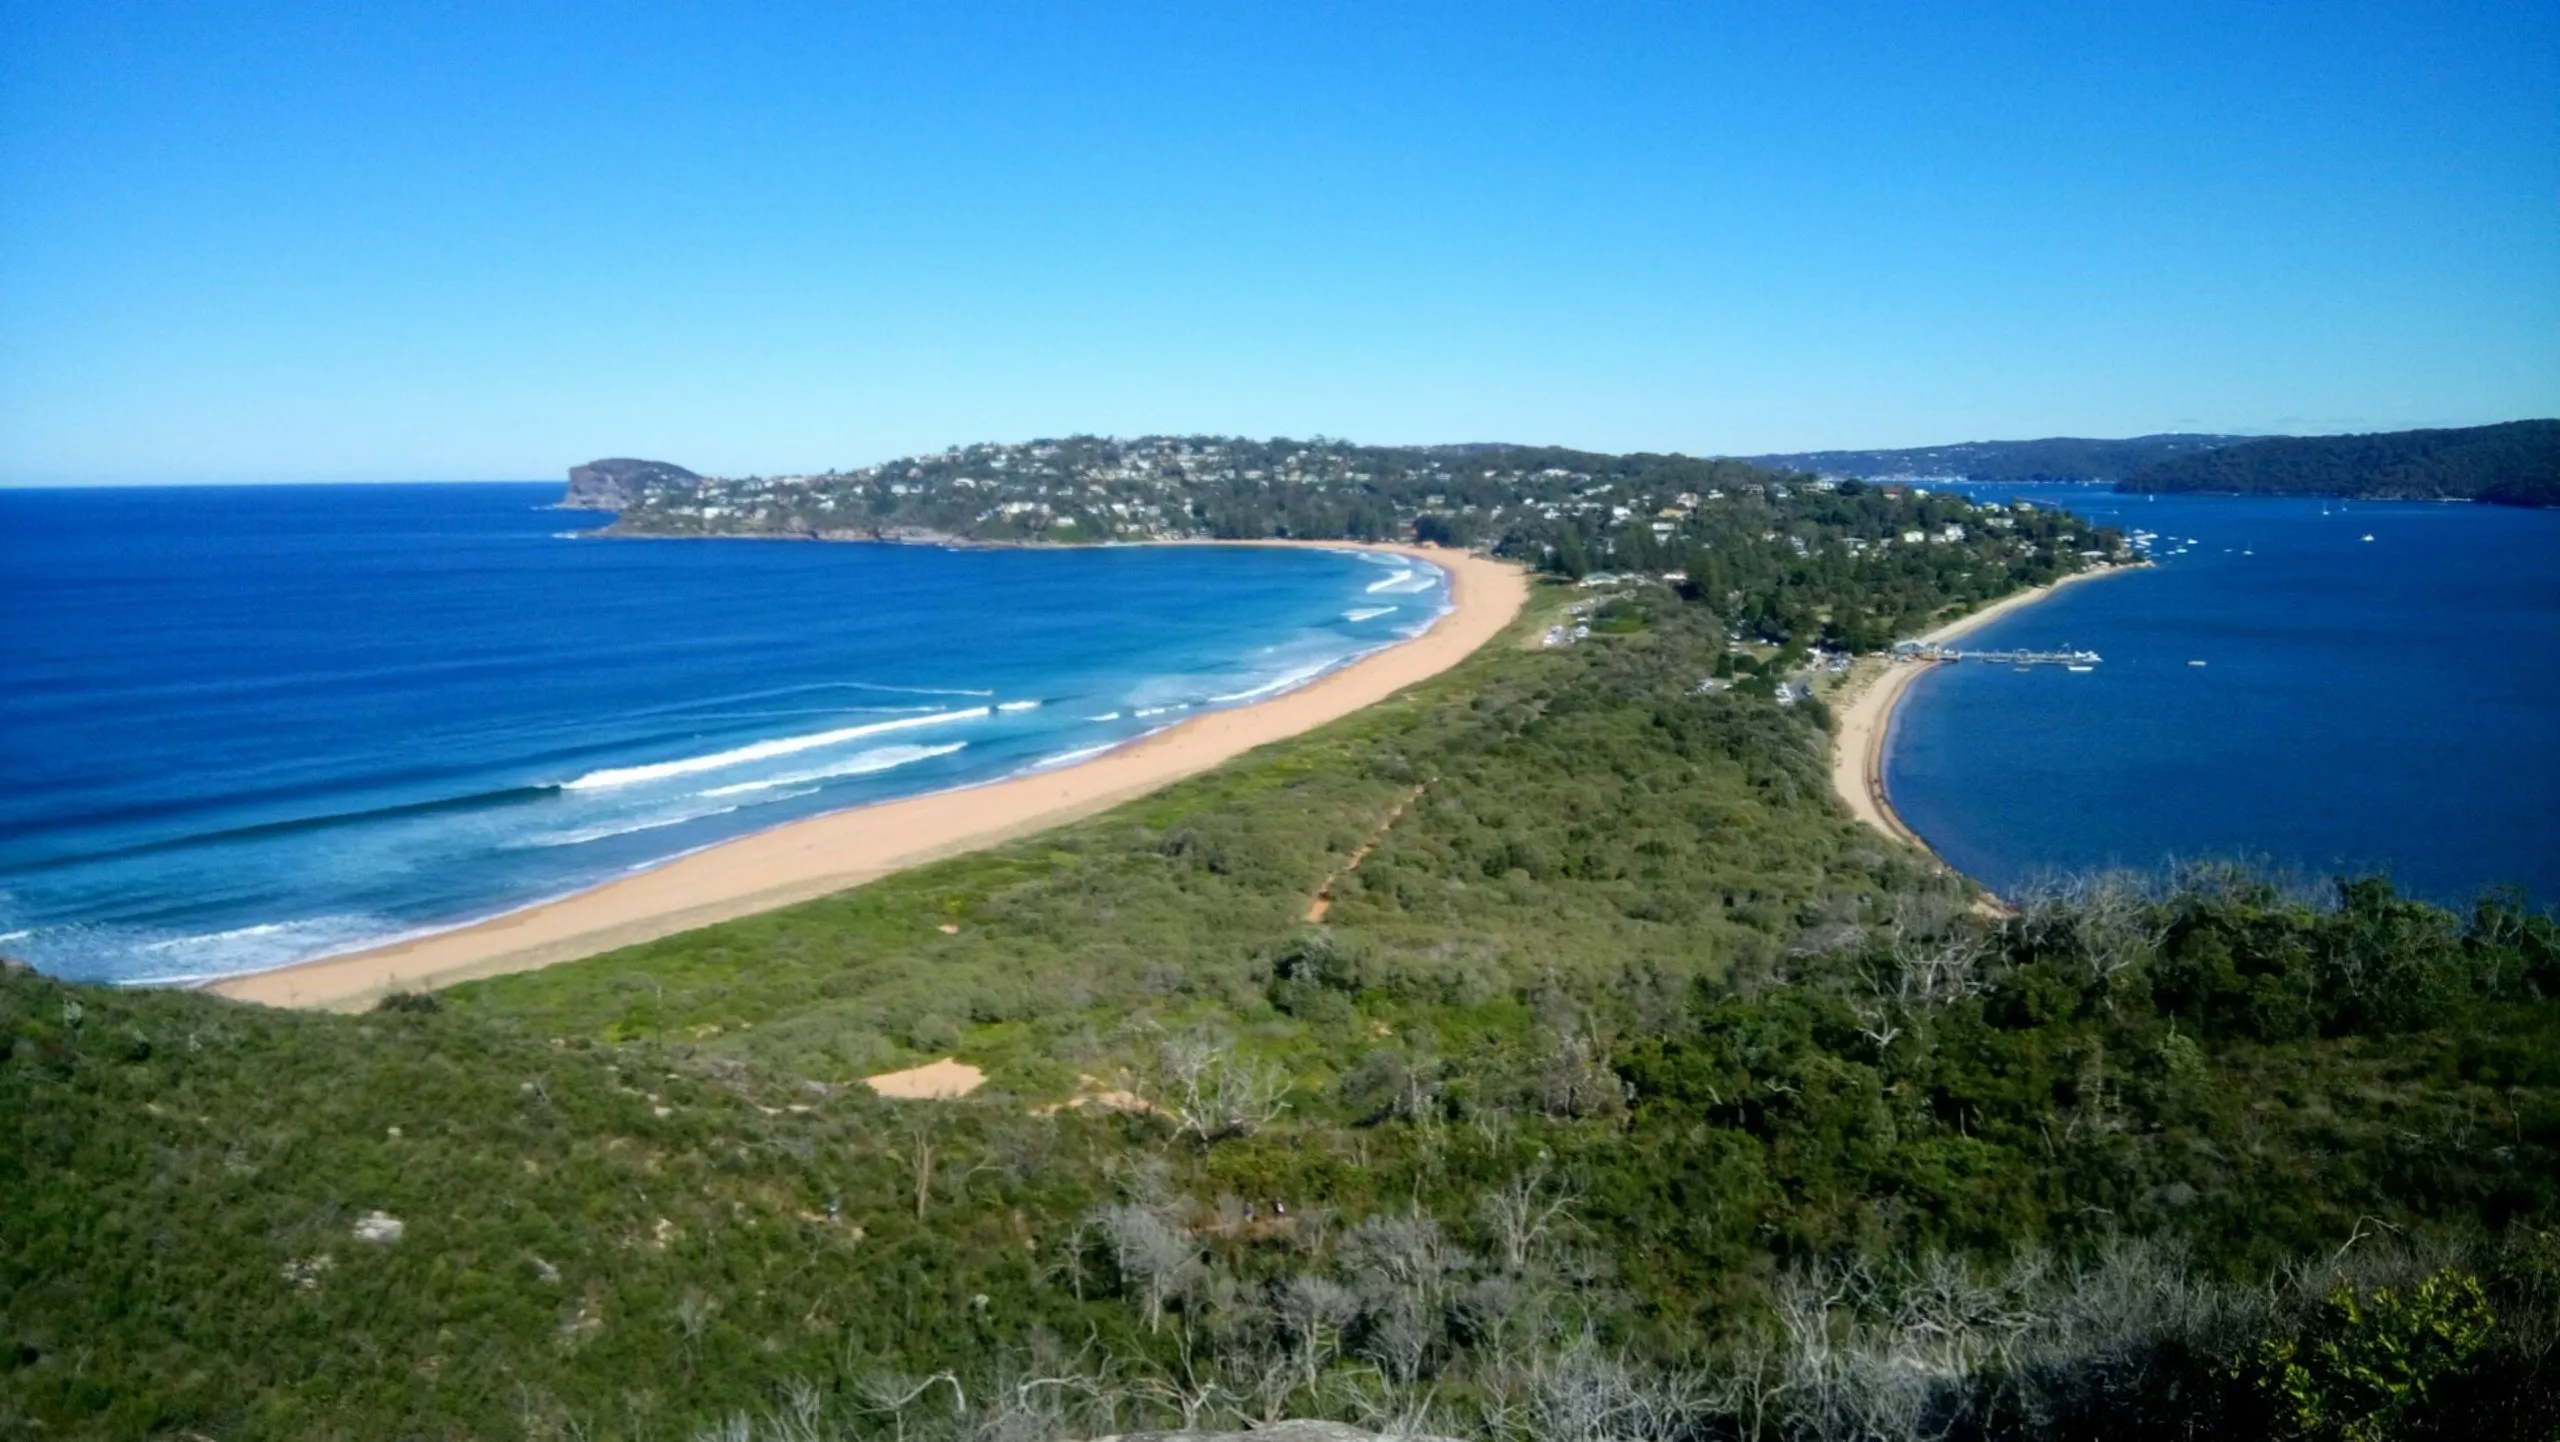 Palm Beach in Australia, Australia and Oceania | Surfing,Beaches - Rated 0.9